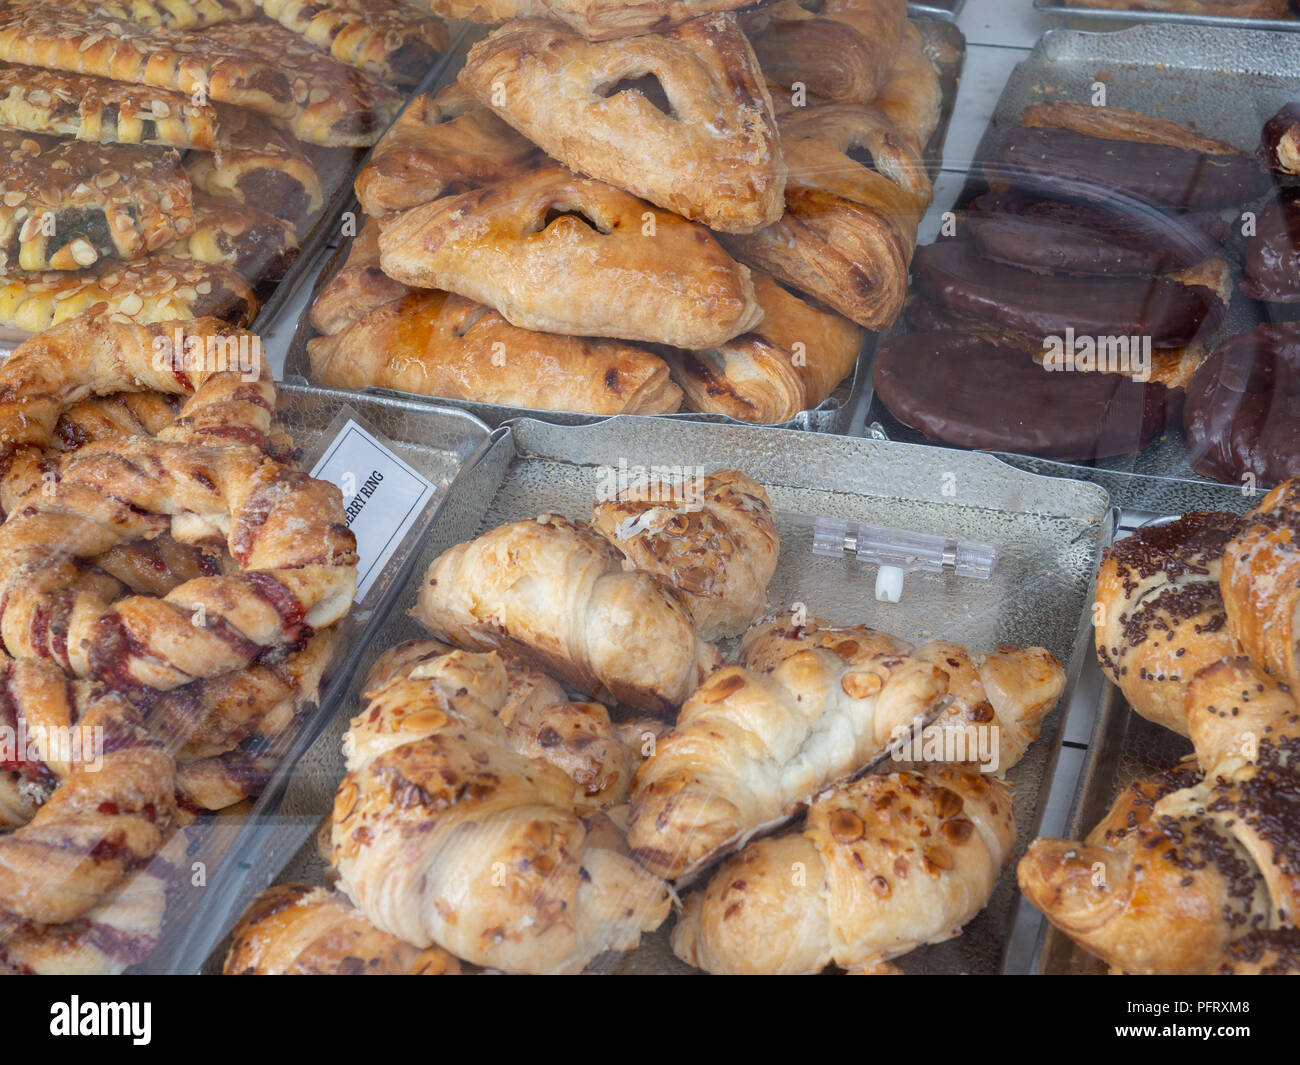 Selection Of Pastries Stock Photo